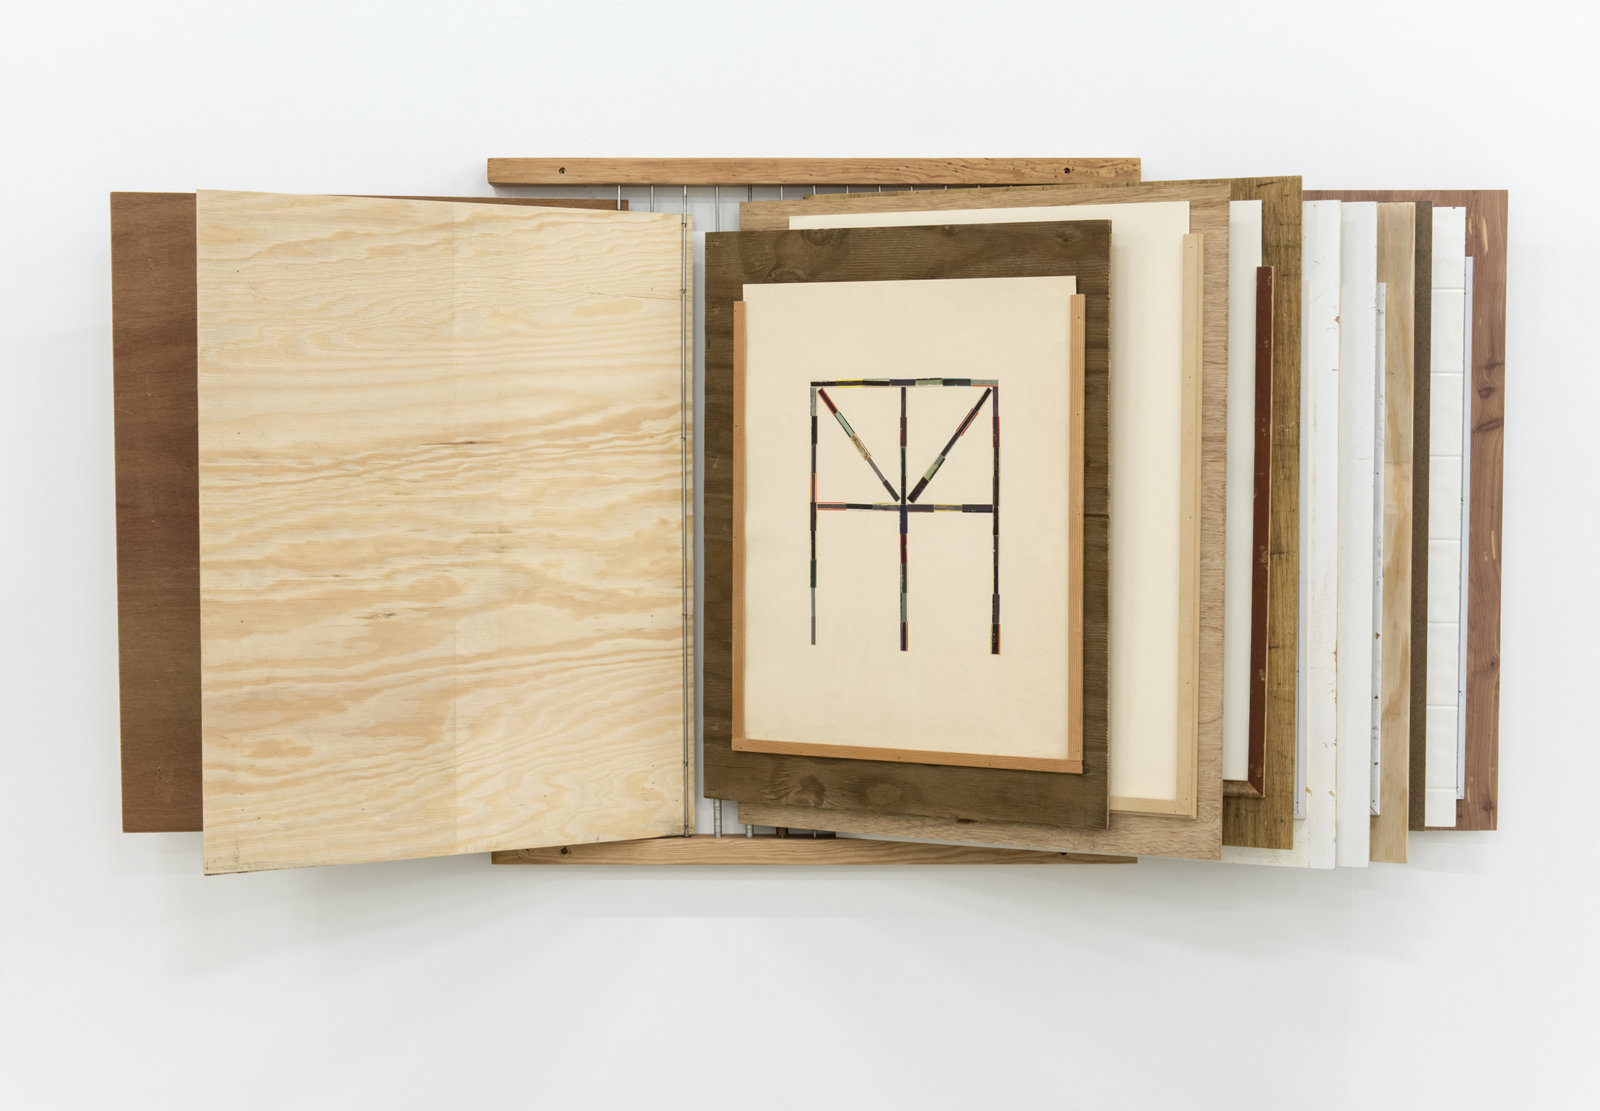 Ashes Withyman, Household, Temple, Yard, 2013, match strike pads on paper, 31 x 23 in. (78 x 59 cm)